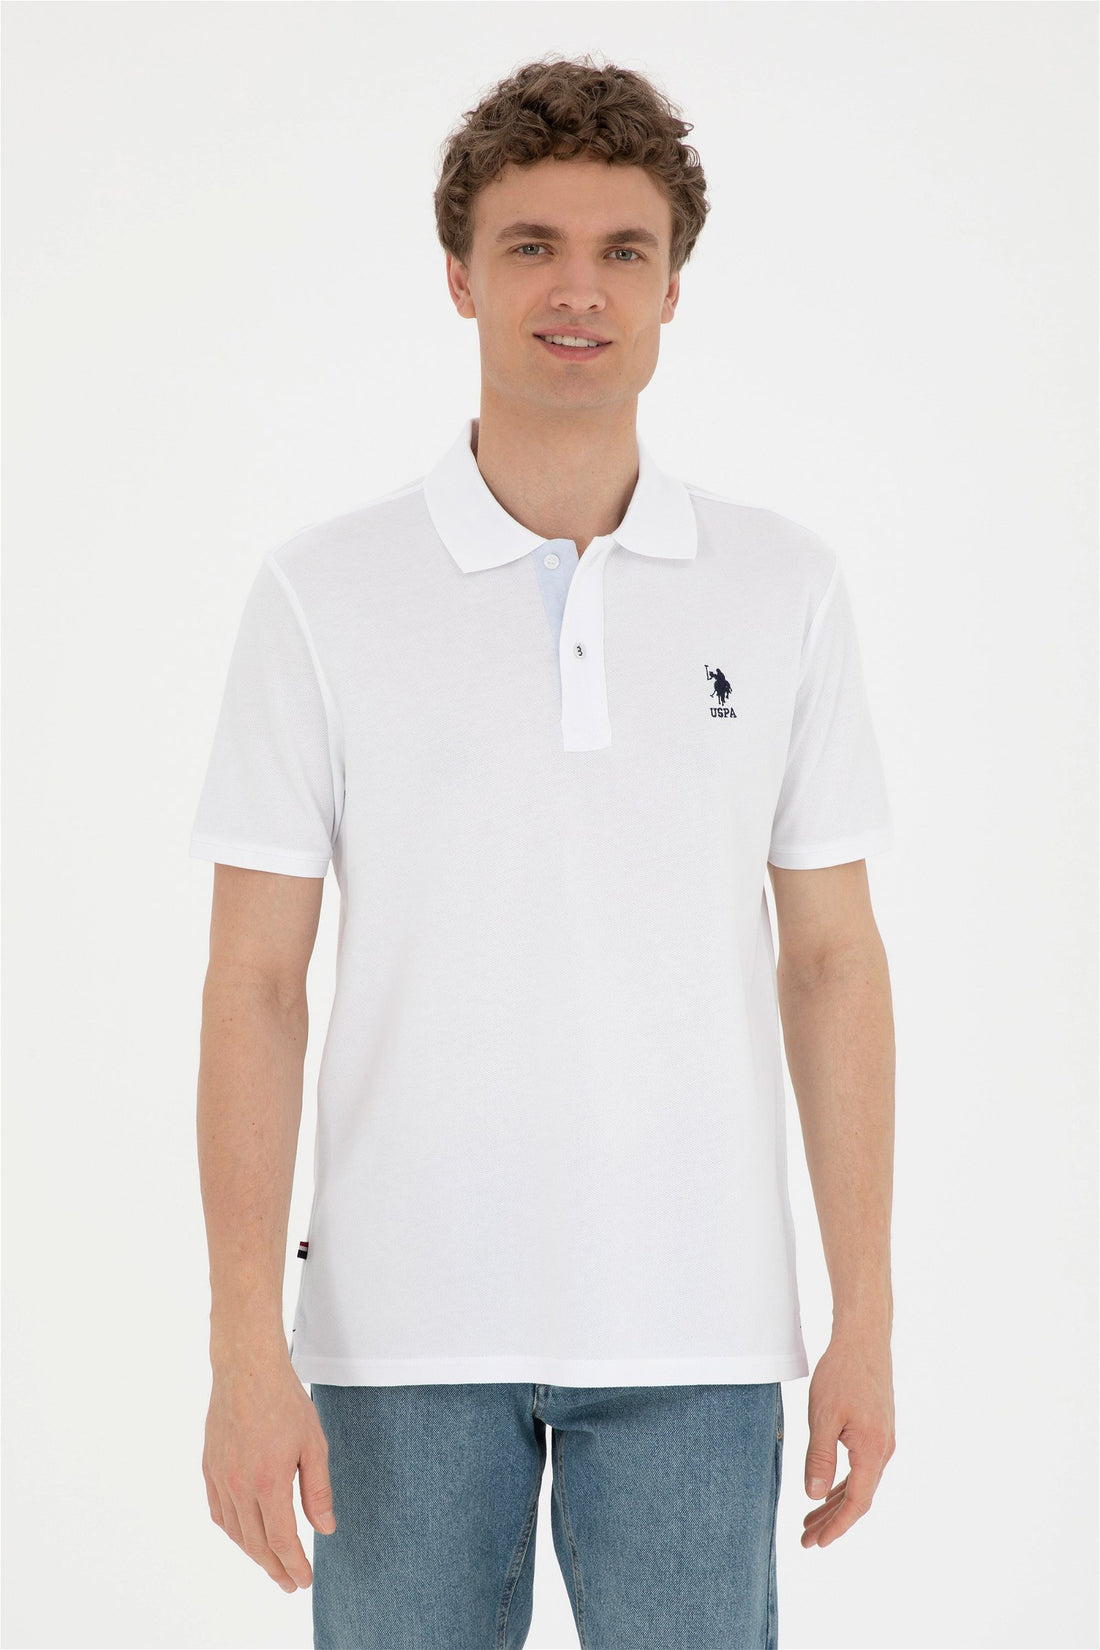 Polo Shirt With Chest Logo_G081SZ0110 1794832_VR013_01